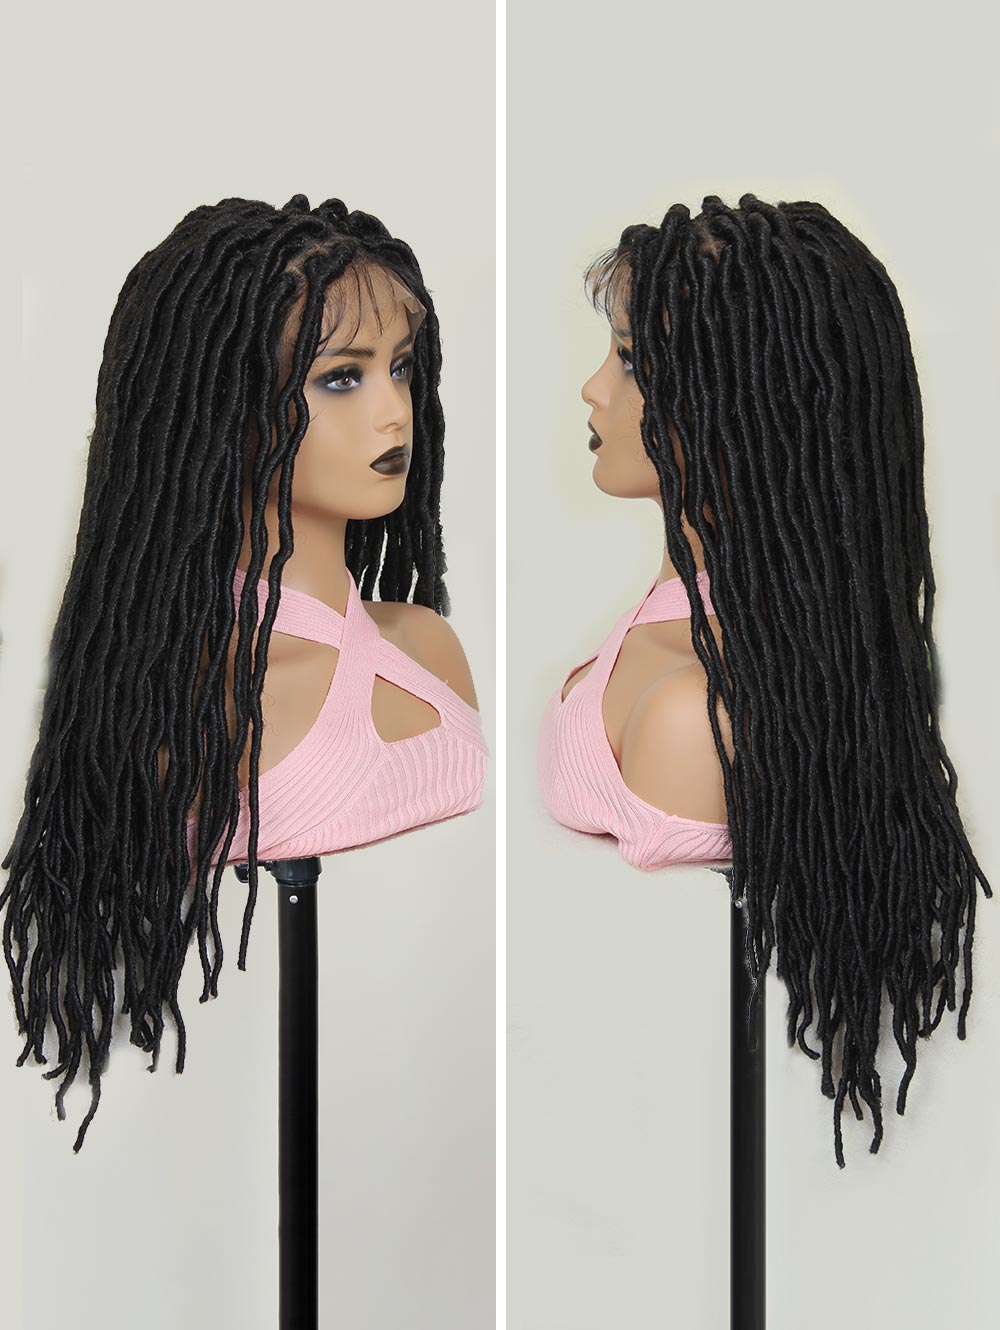 26" Full Double Lace Knotless Square Faux Locs Braided Wig--Dreadlock Handmade Synthetic Wig